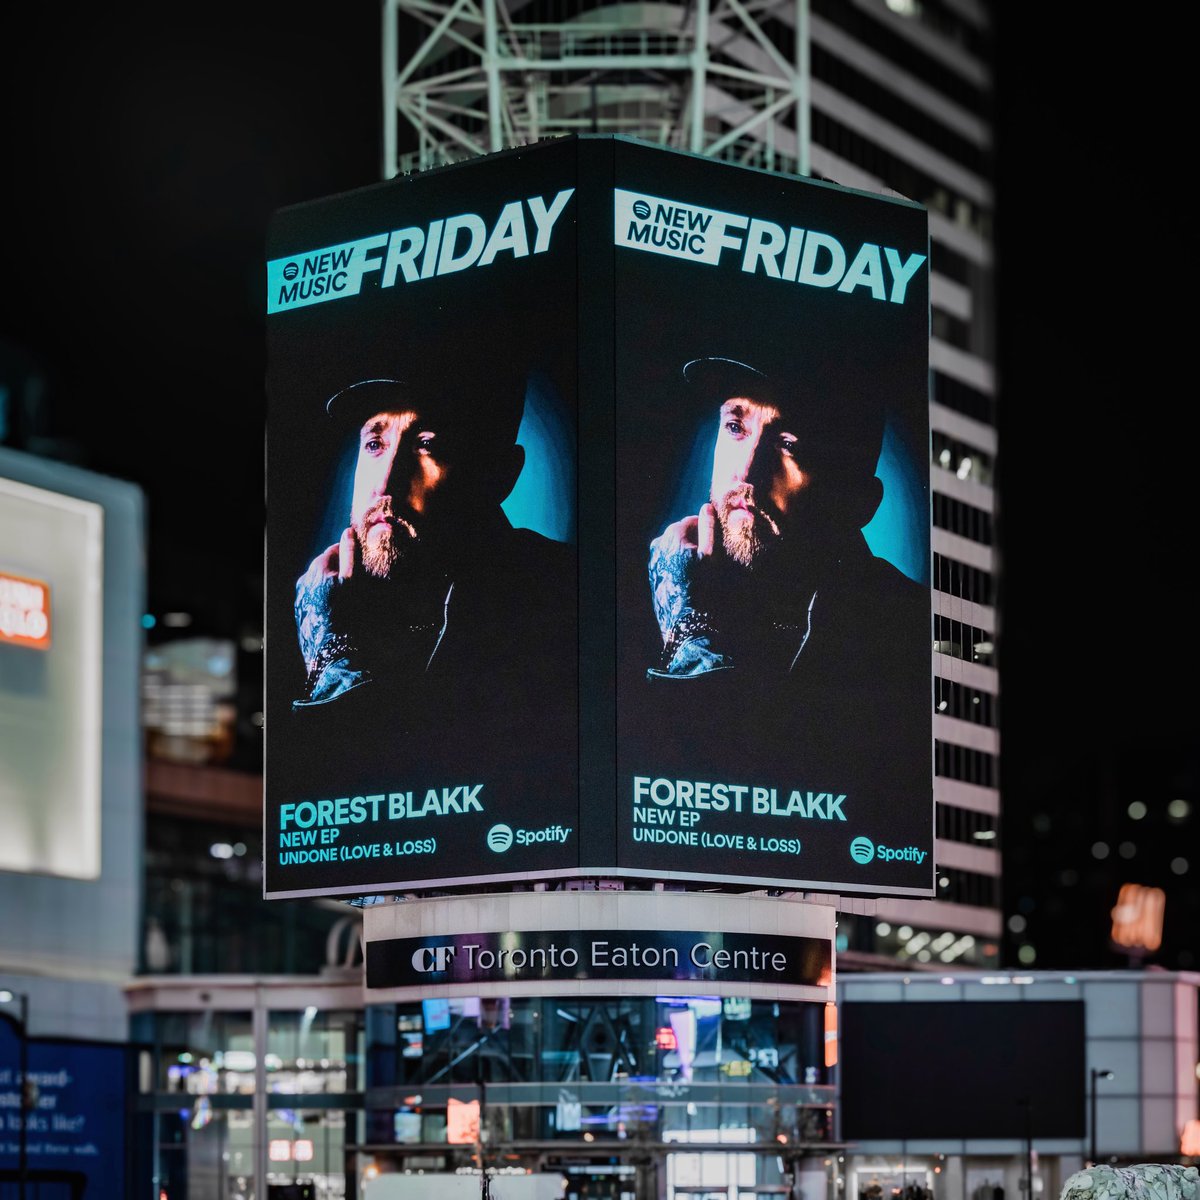 UNREAL!!!!!! Spotify put my face on a billboard in downtown Toronto!!! Listen to my new EP, “Undone” (love & loss) now on @Spotify